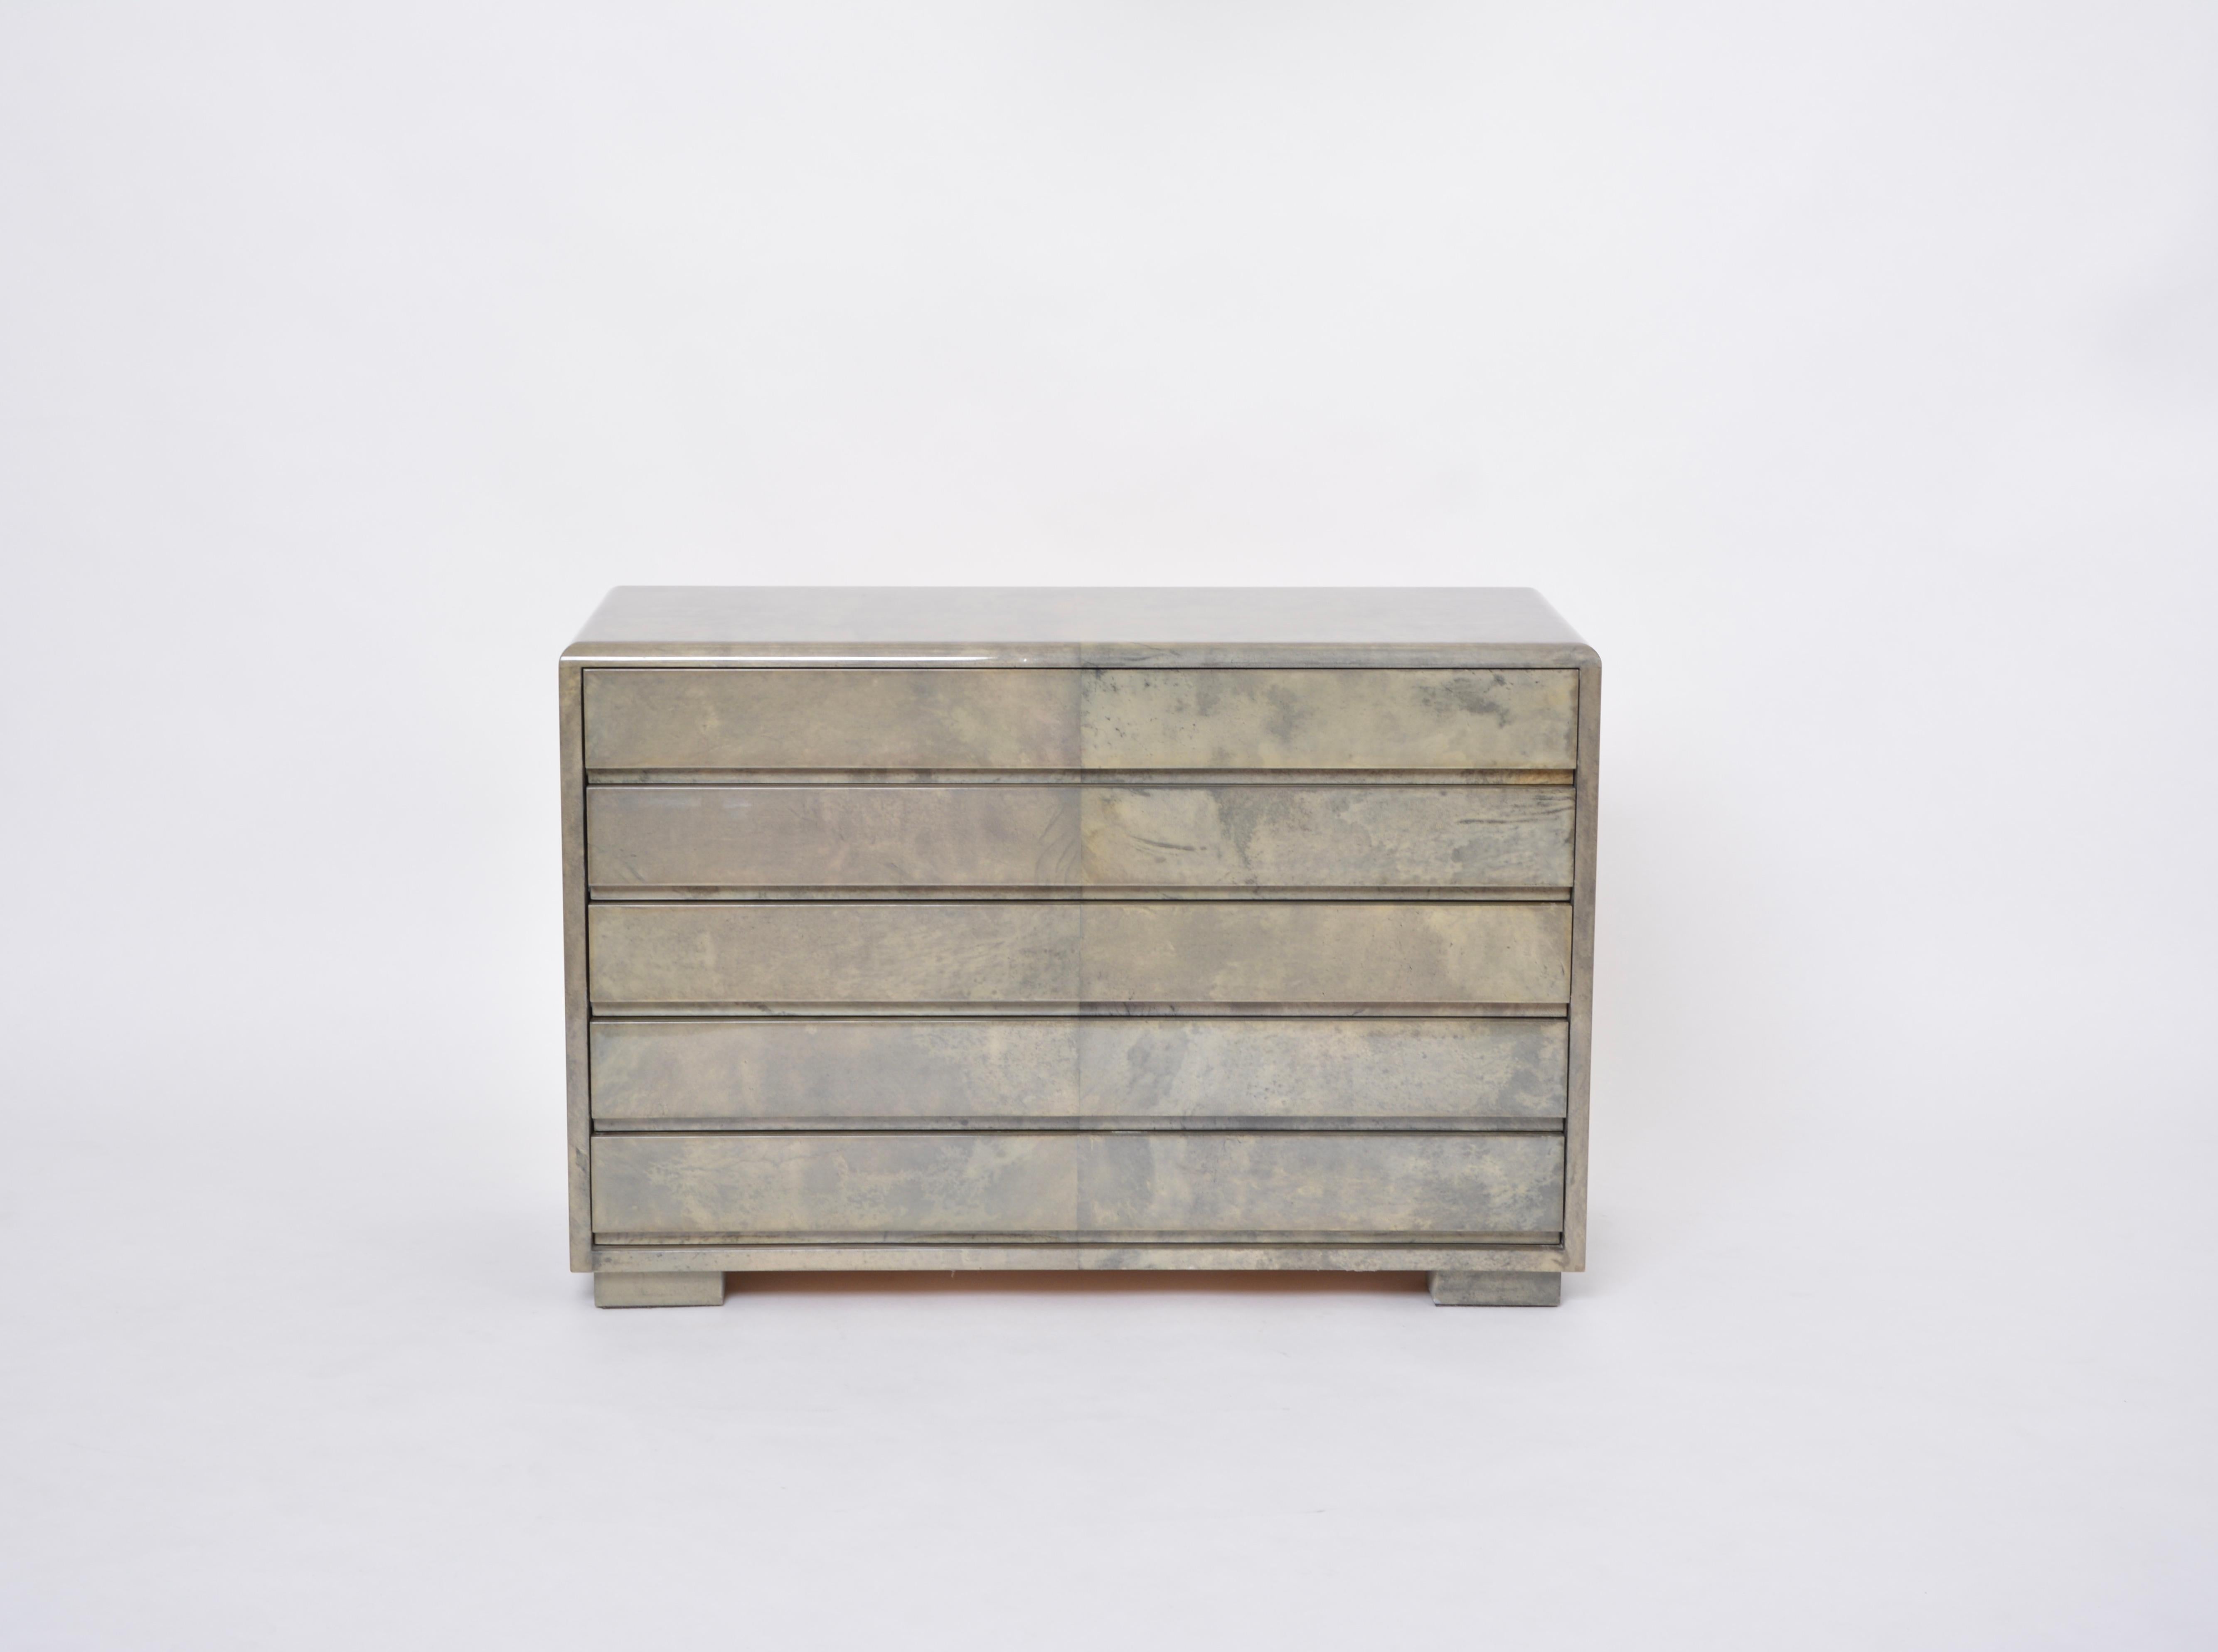 Mid-Century Modern Chest of drawers made of wood and laquered Goat Skin by Aldo Tura designed by Aldo Tura and produced in Italy approximately in the 1970s.
This chest of drawers has a wooden structure which is covered in Aldo Tura's signature style